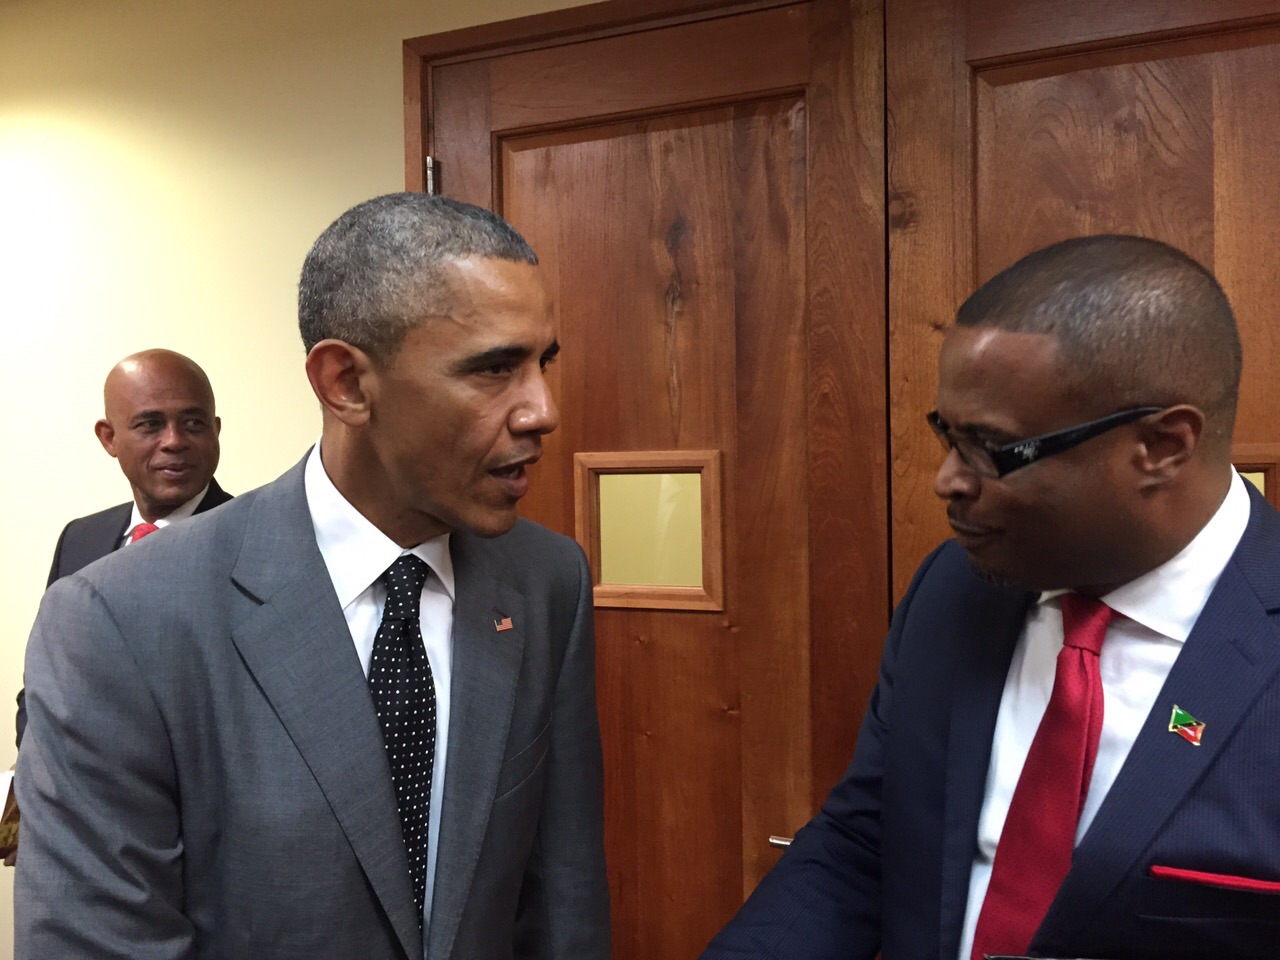 Federal Minister of Foreign Affairs and Deputy Premier of Nevis Hon. Mark Brantley (right) speaks with United States of America President Barack Obama during the US-CARICOM Summit in Jamaica on April 09, 2015